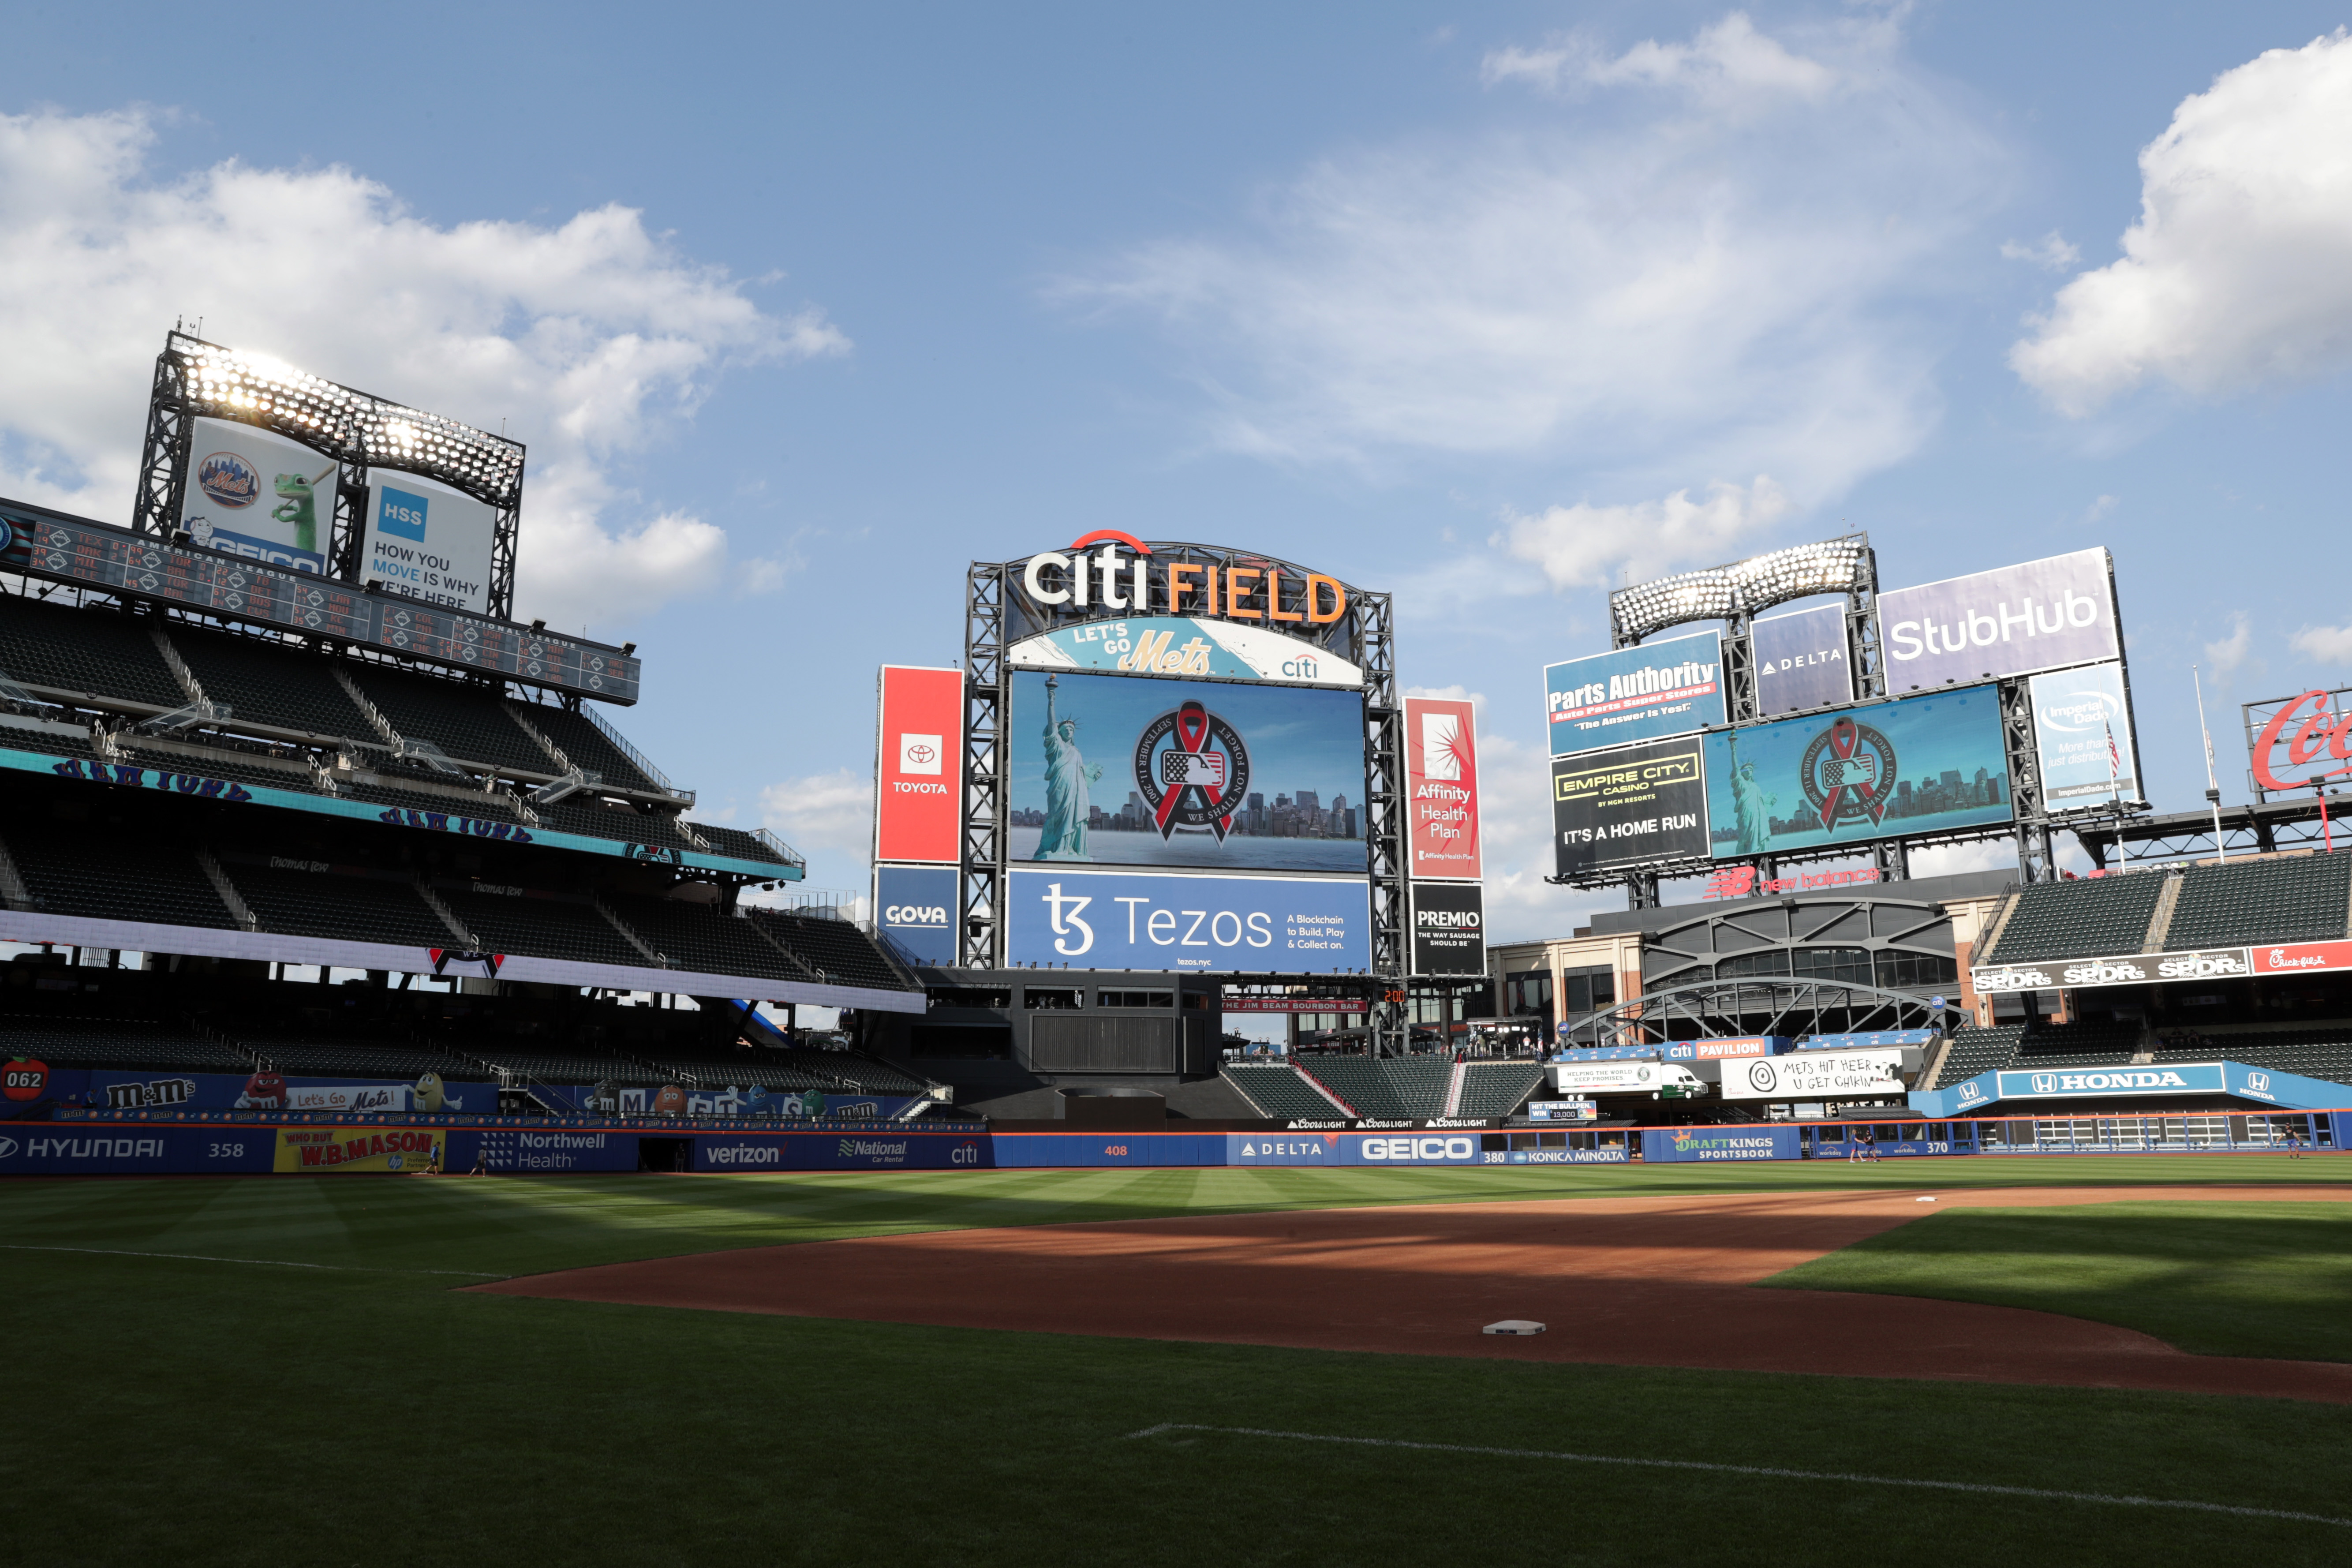 A general view of the field and 9/11 remembrance logo before the game between the New York Yankees and the New York Mets at Citi Field on Saturday, September 11, 2021 in New York, New York.